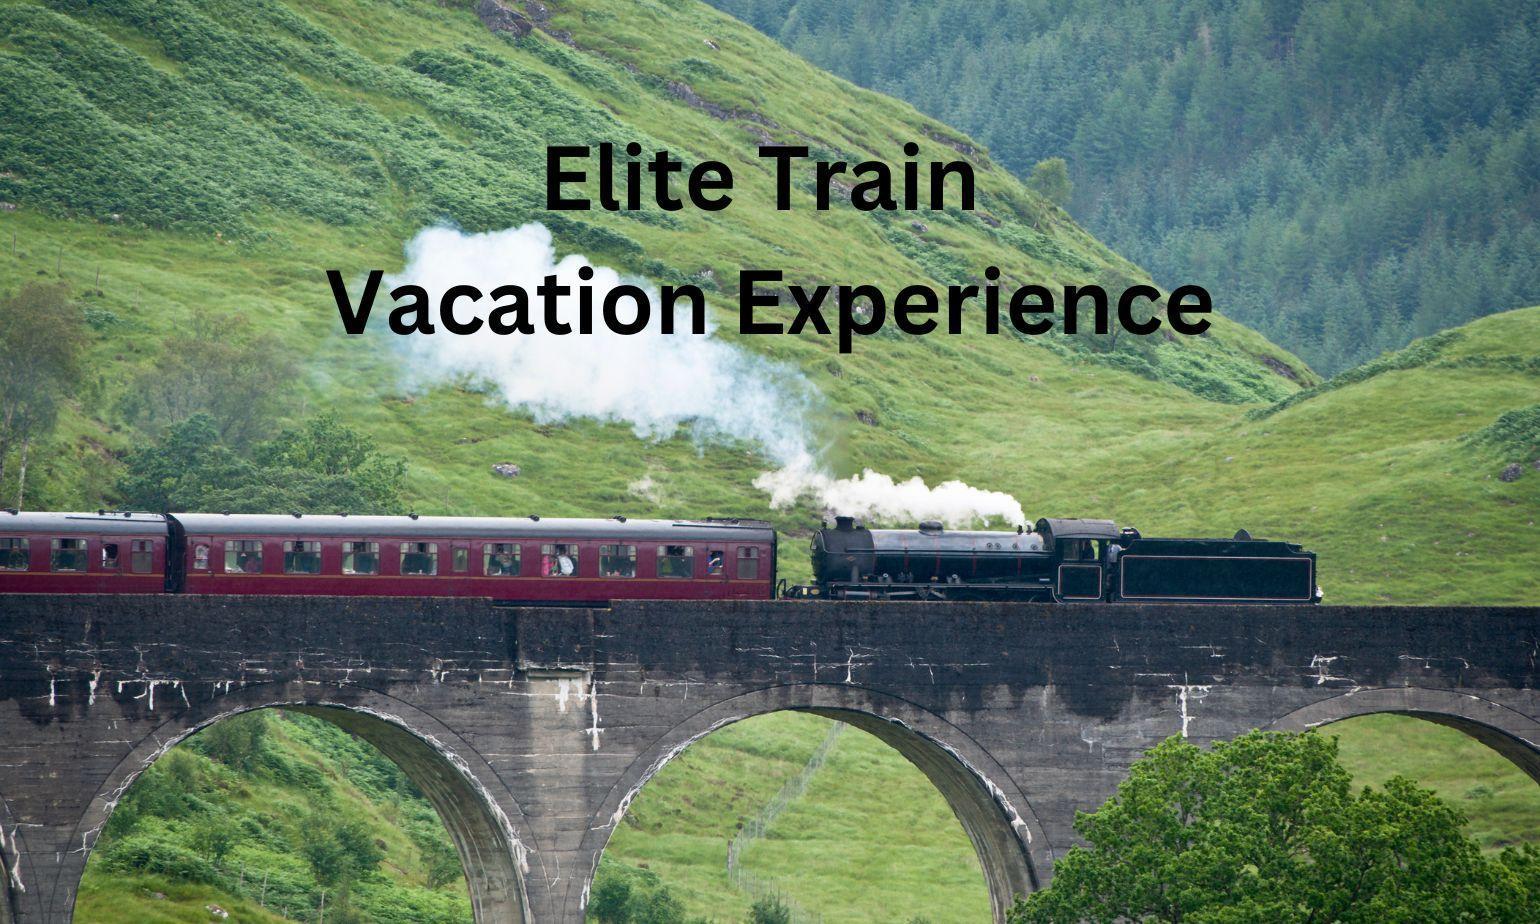 How to Indulge in luxury and comfort with an Elite Train Vacation Experience?